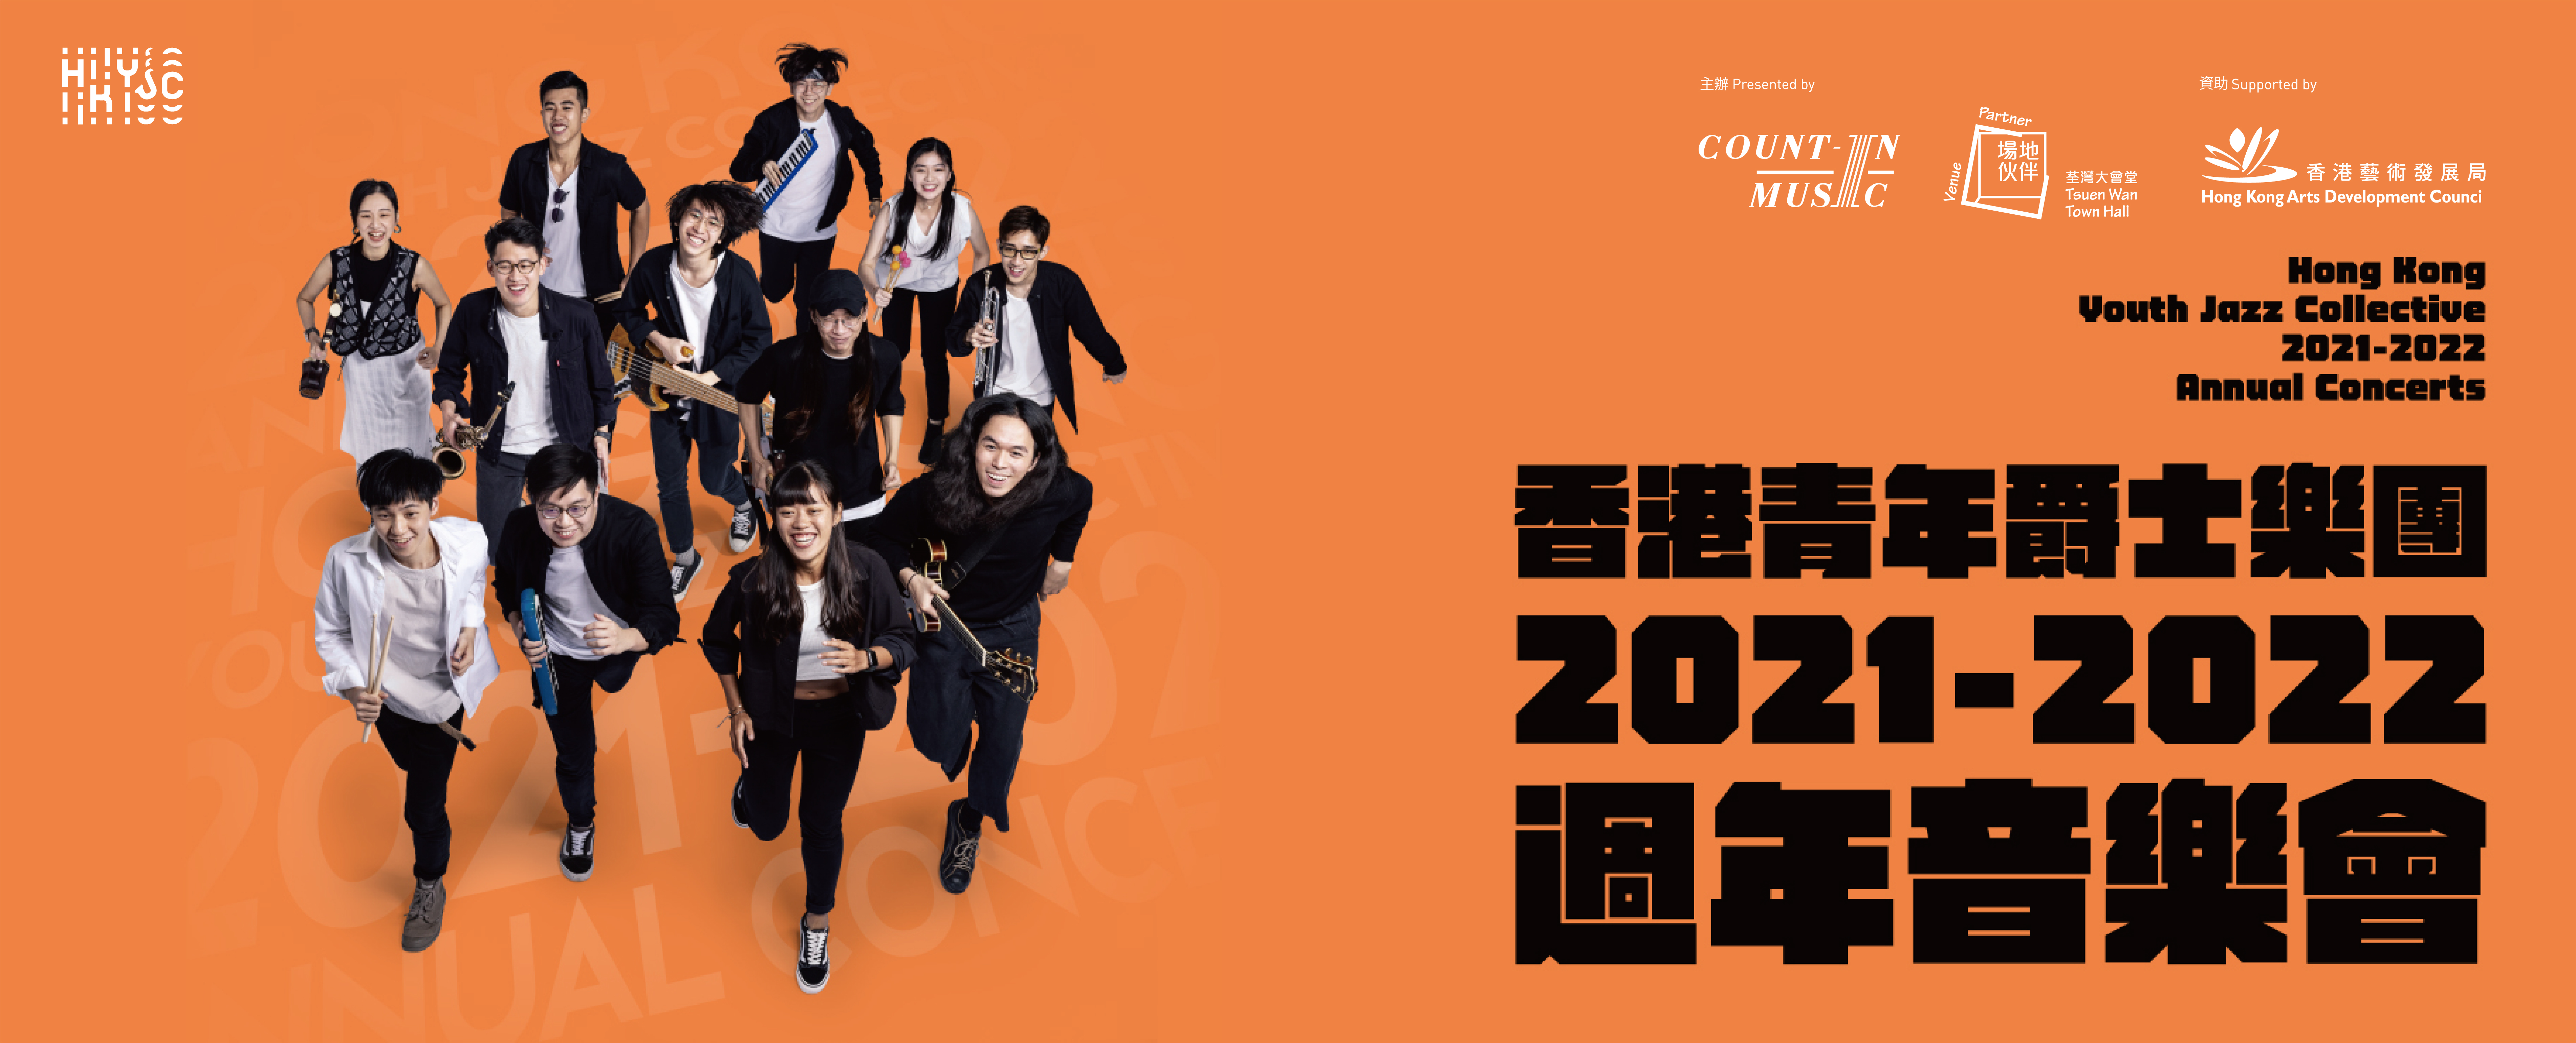 Hong Kong Youth Jazz Collective 2021-2022 – Annual Concert